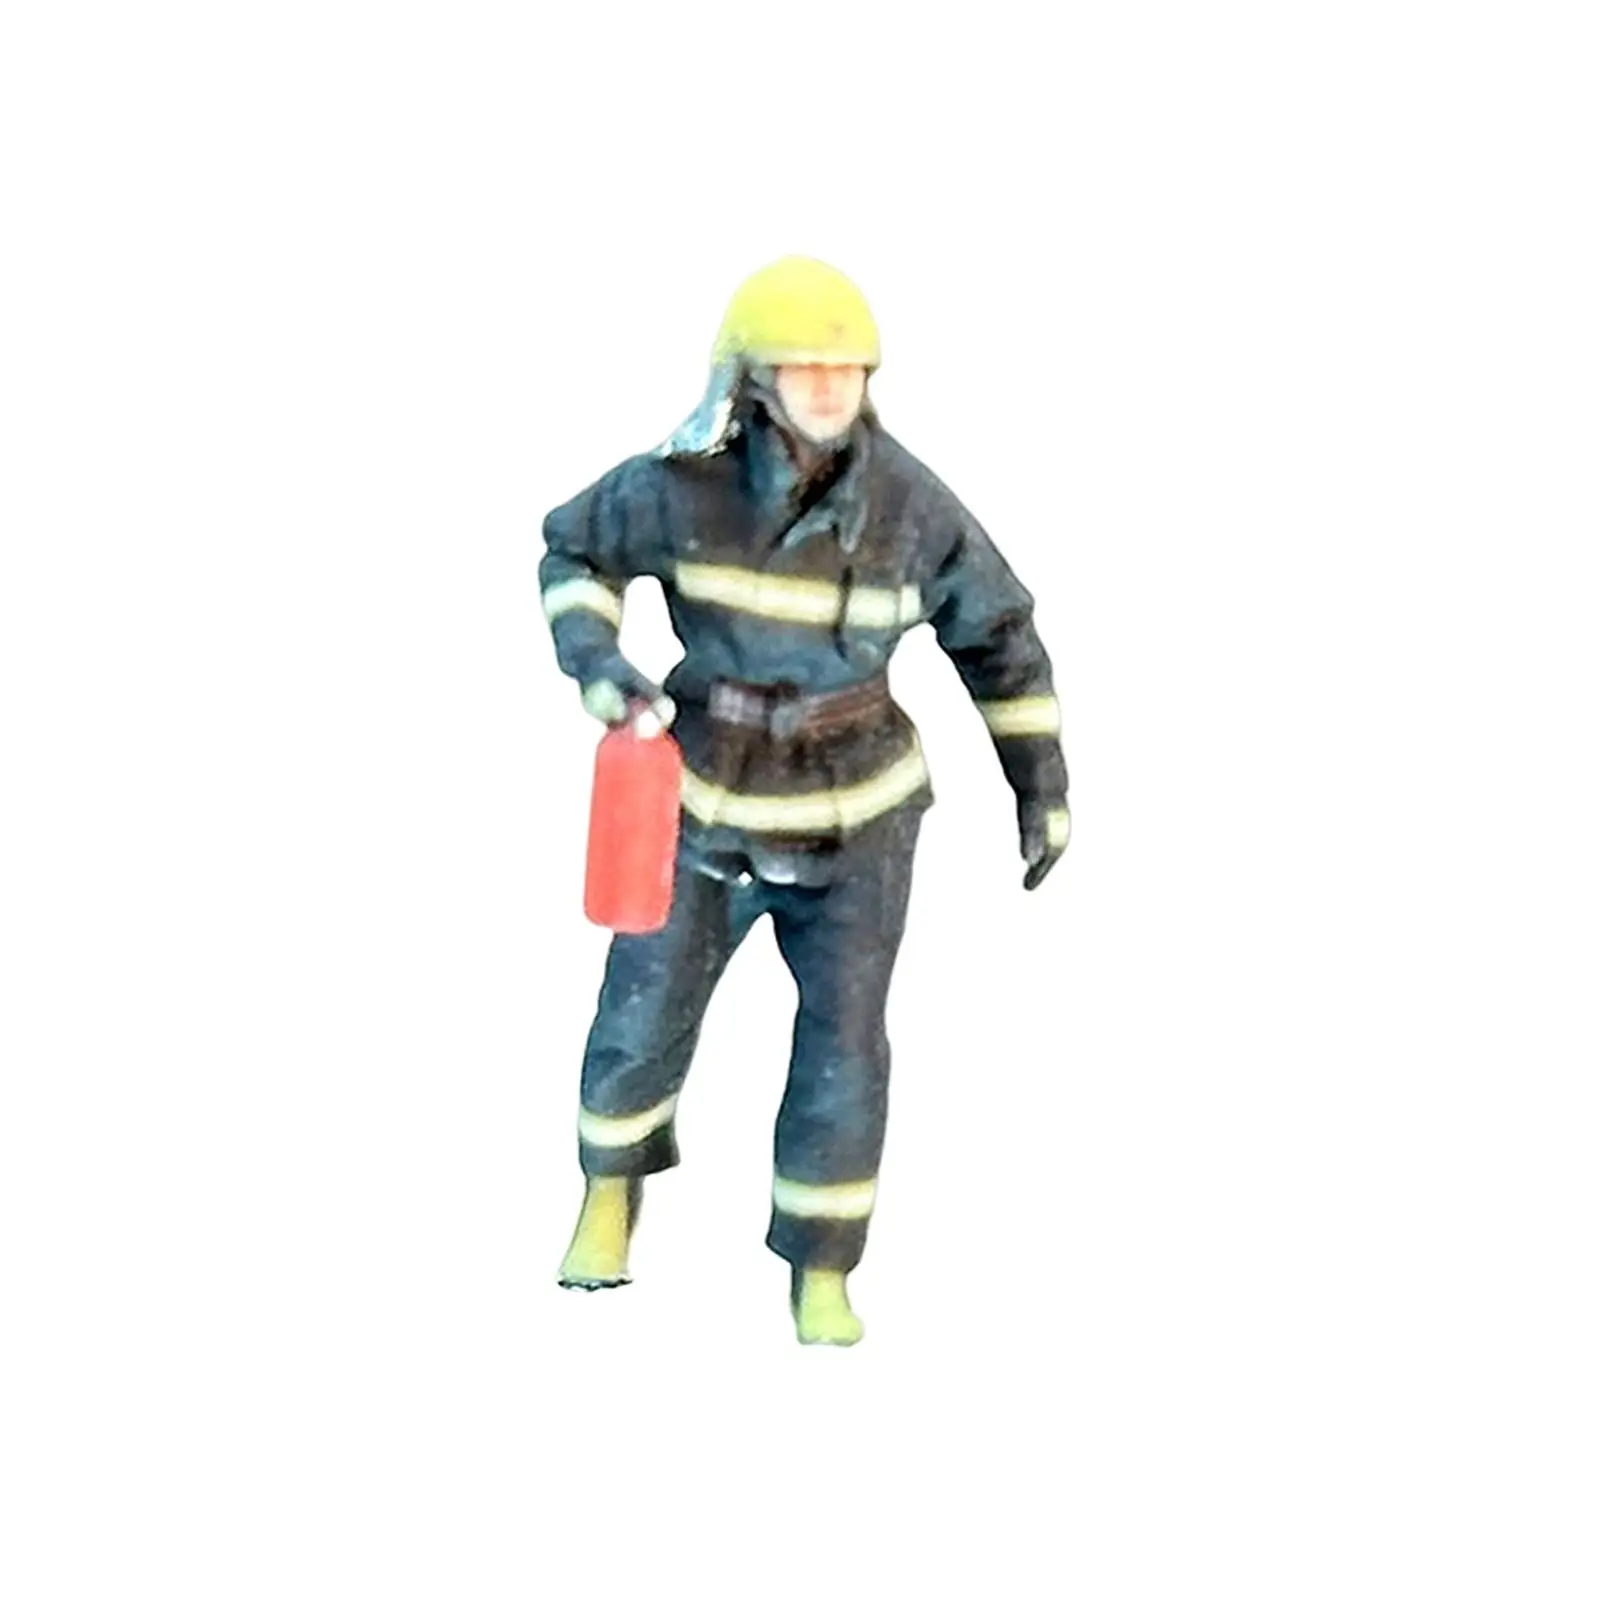 Miniature 1:64 Firefighter Figures Hand Painted Collectibles Model Trains People Figures for Scenery Landscape Building Decor